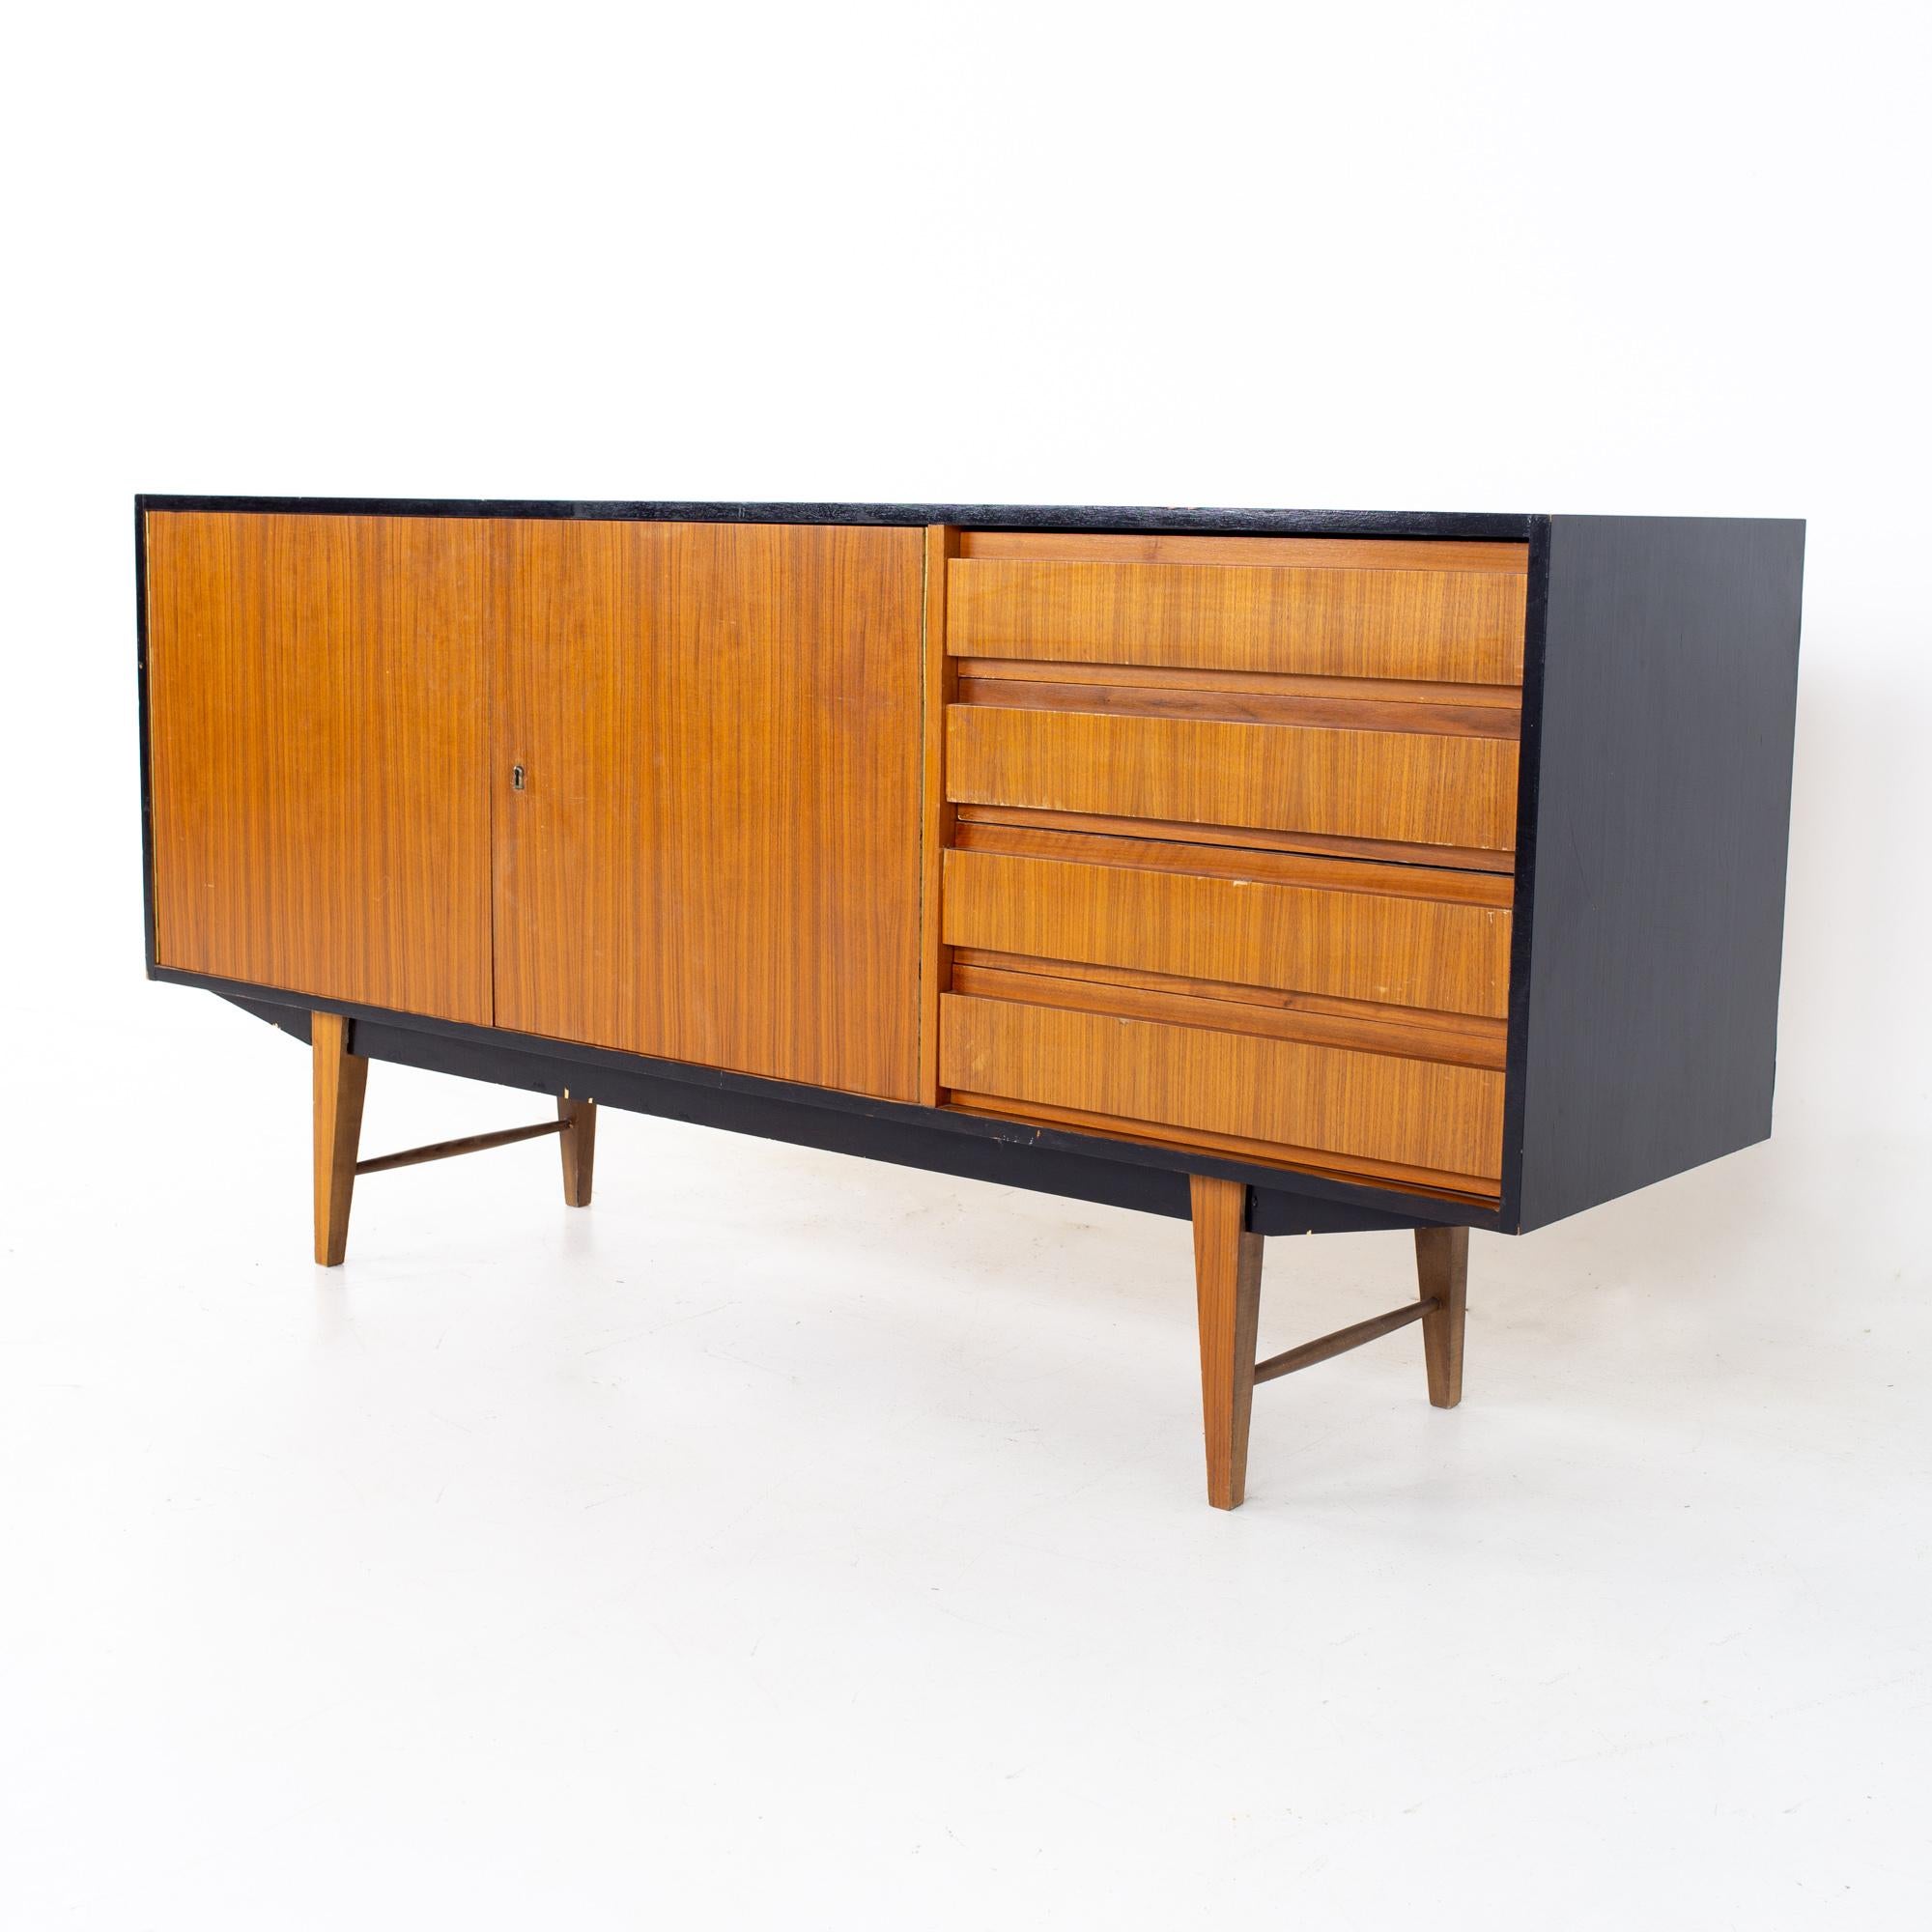 Mid century teak ebonized credenza
Credenza measures: 65 wide x 17.75 deep x 31.5 inches high

All pieces of furniture can be had in what we call restored vintage condition. That means the piece is restored upon purchase so it’s free of